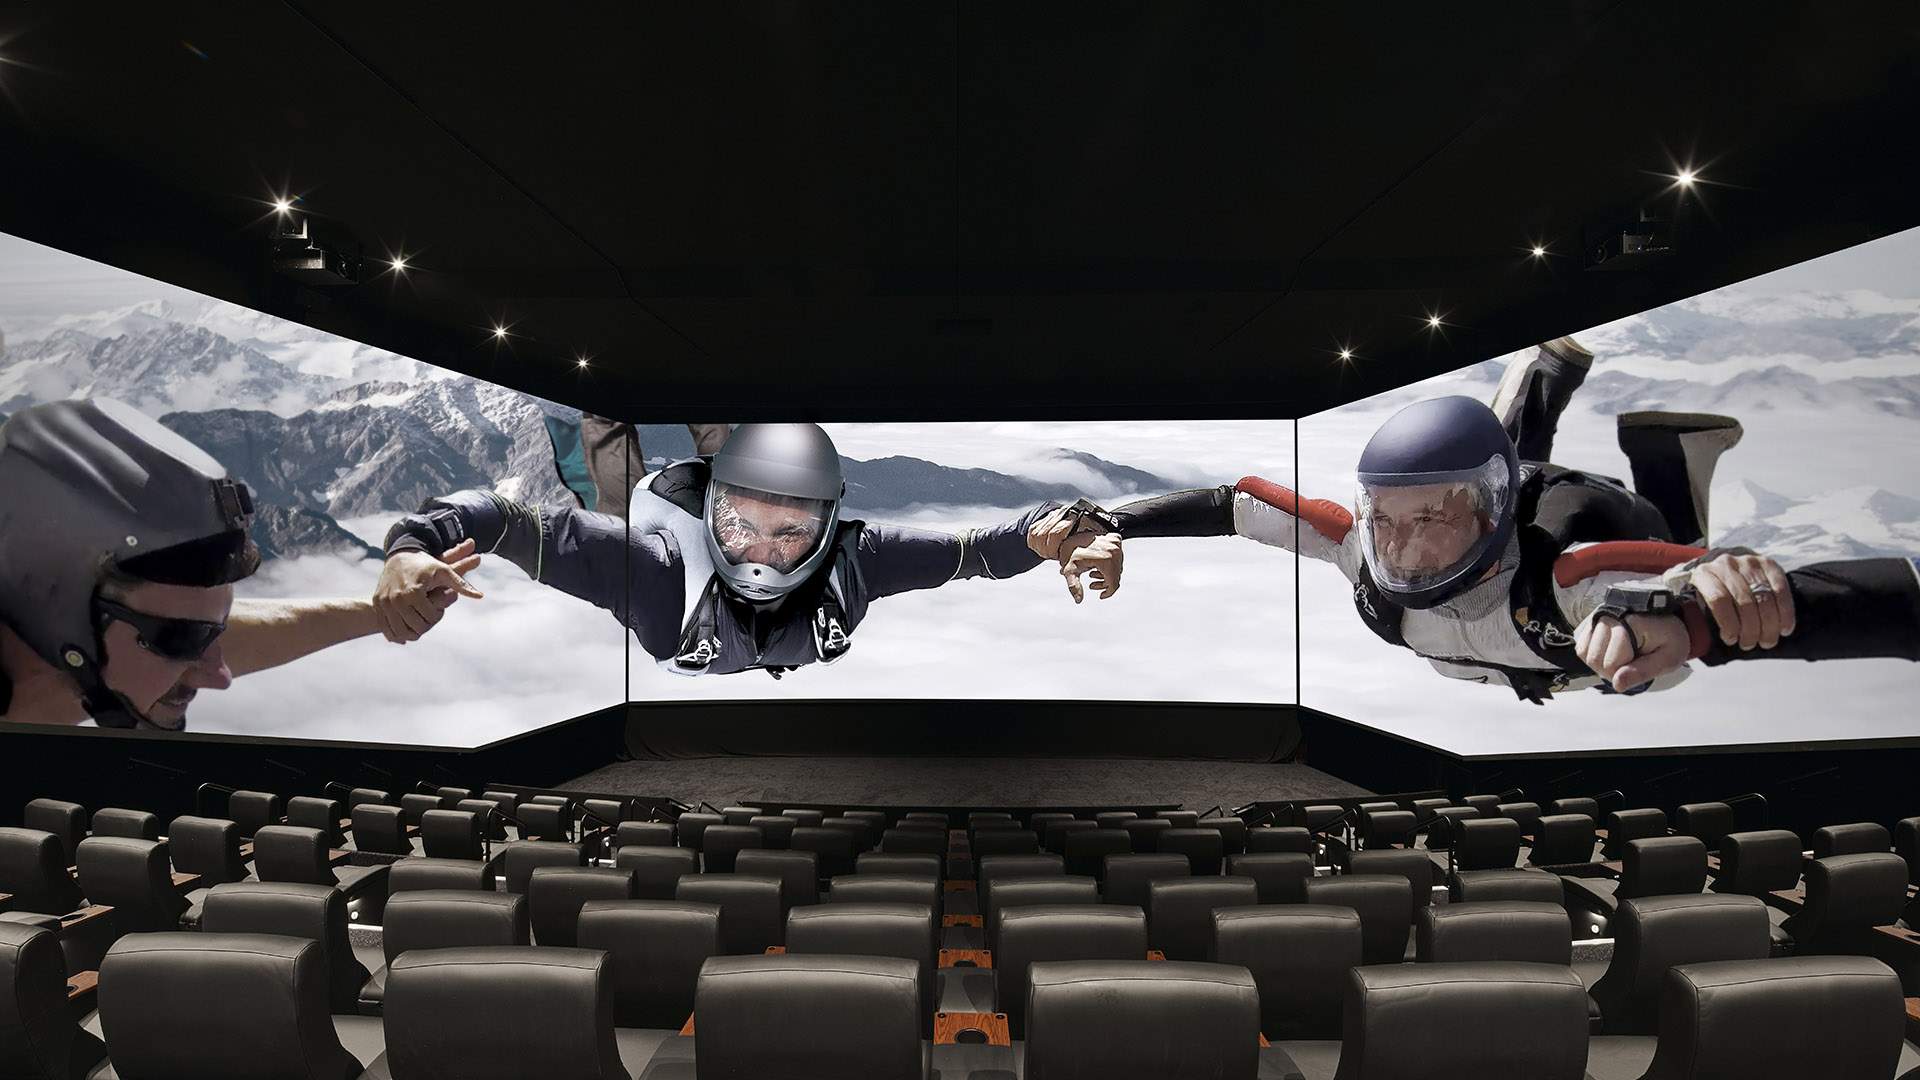 Event Cinemas' New ScreenX with 270-Degree Viewing Has Brought Its Surround-Screen Format to Sydney